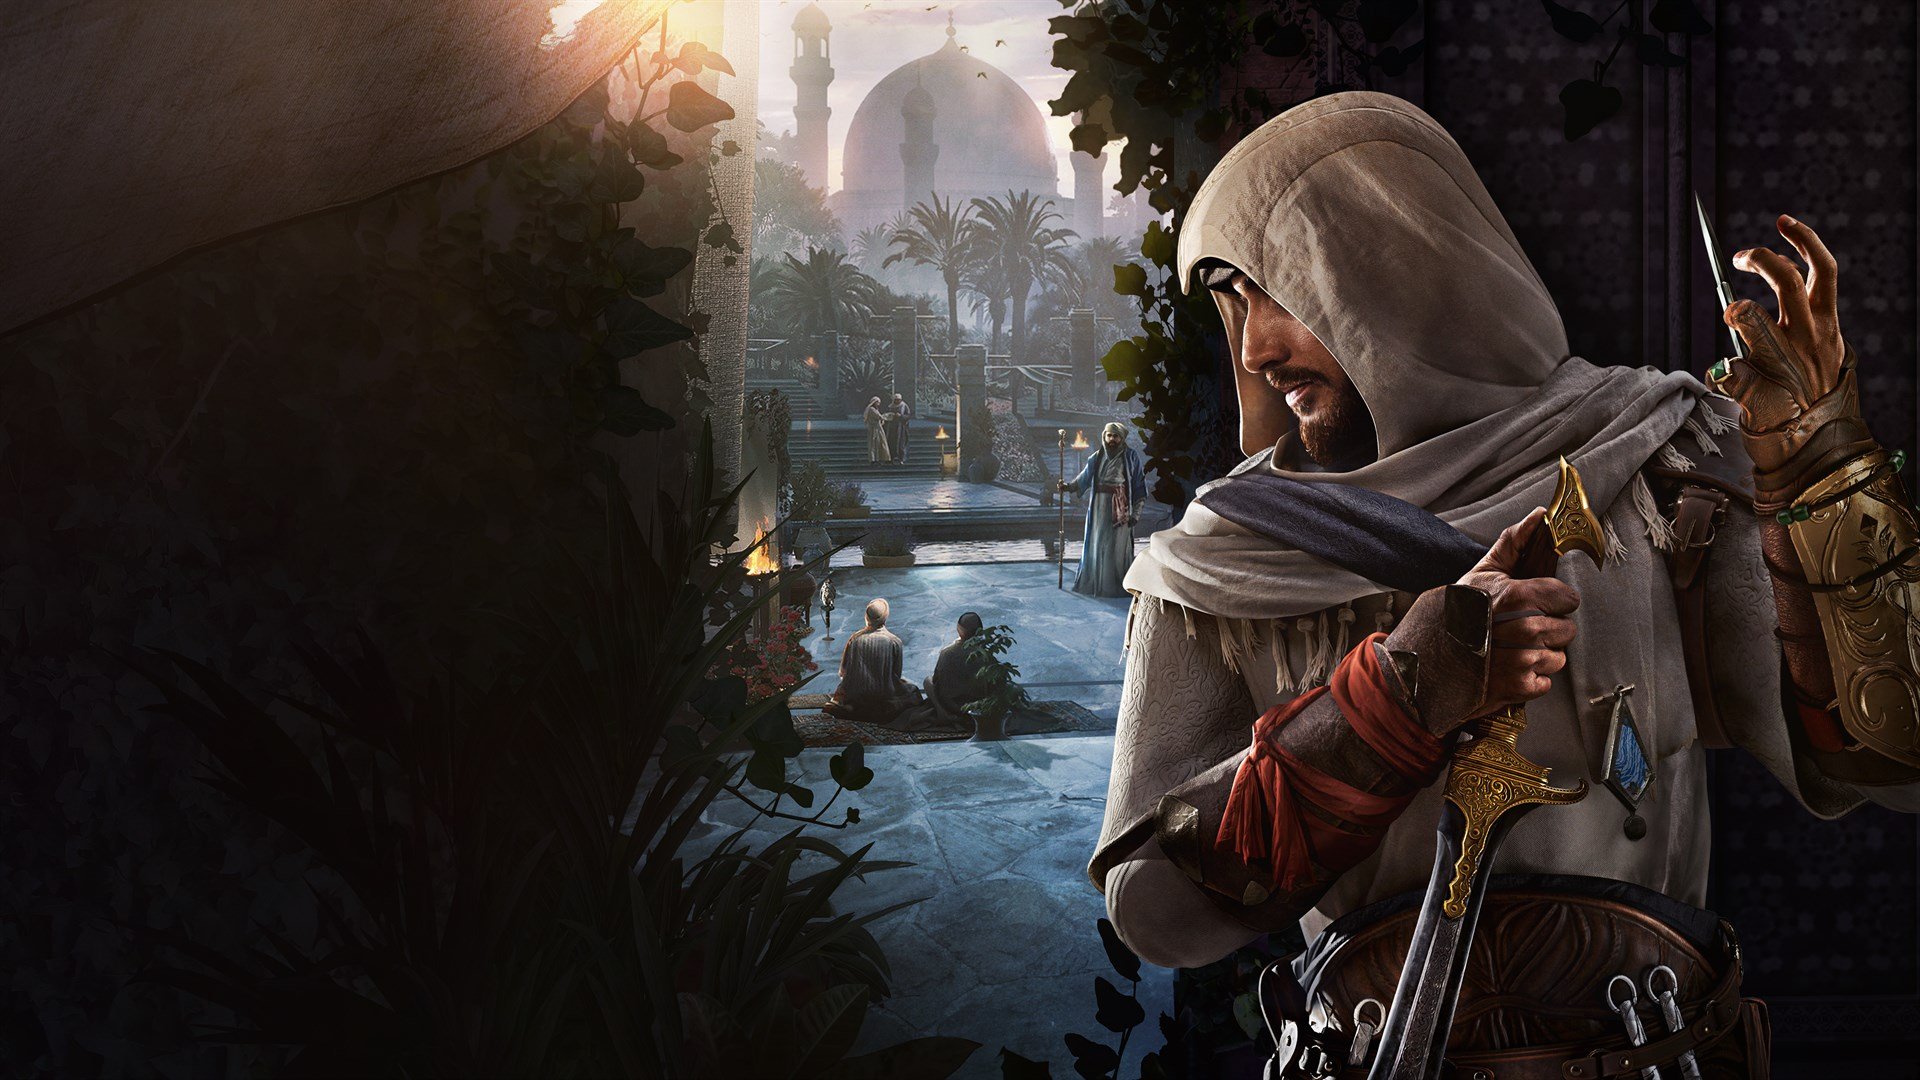 Play Assassin's Creed Origins, Assassin's Creed Odyssey, and Assassin's  Creed Valhalla For $1 With Ubisoft+